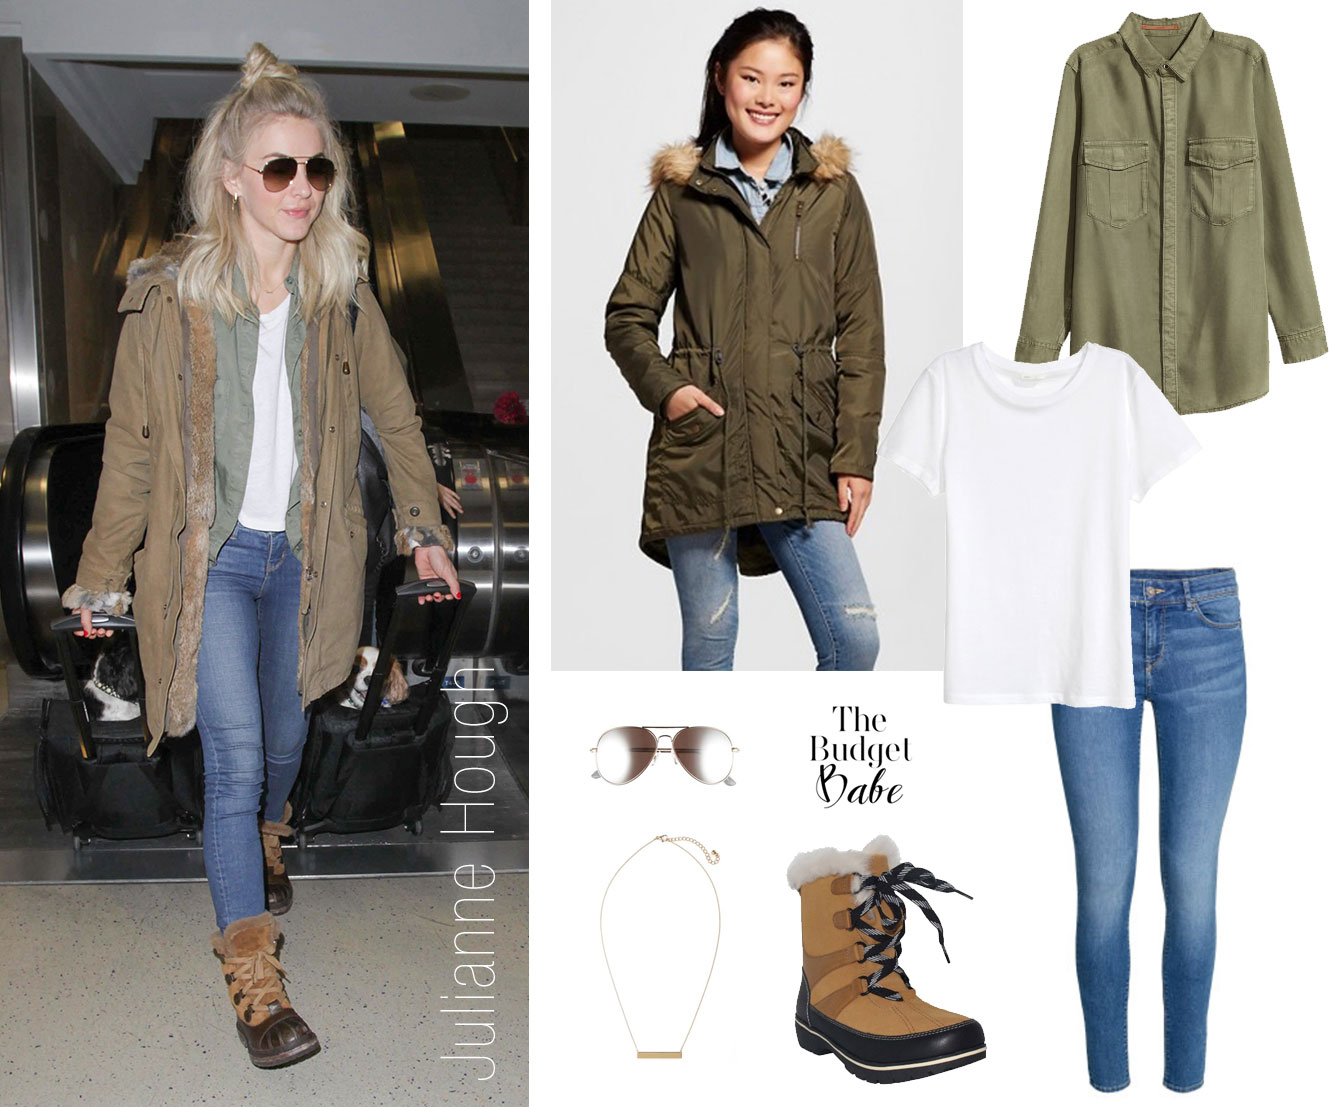 Julianne Hough looks winter chic in a parka and snow boots.